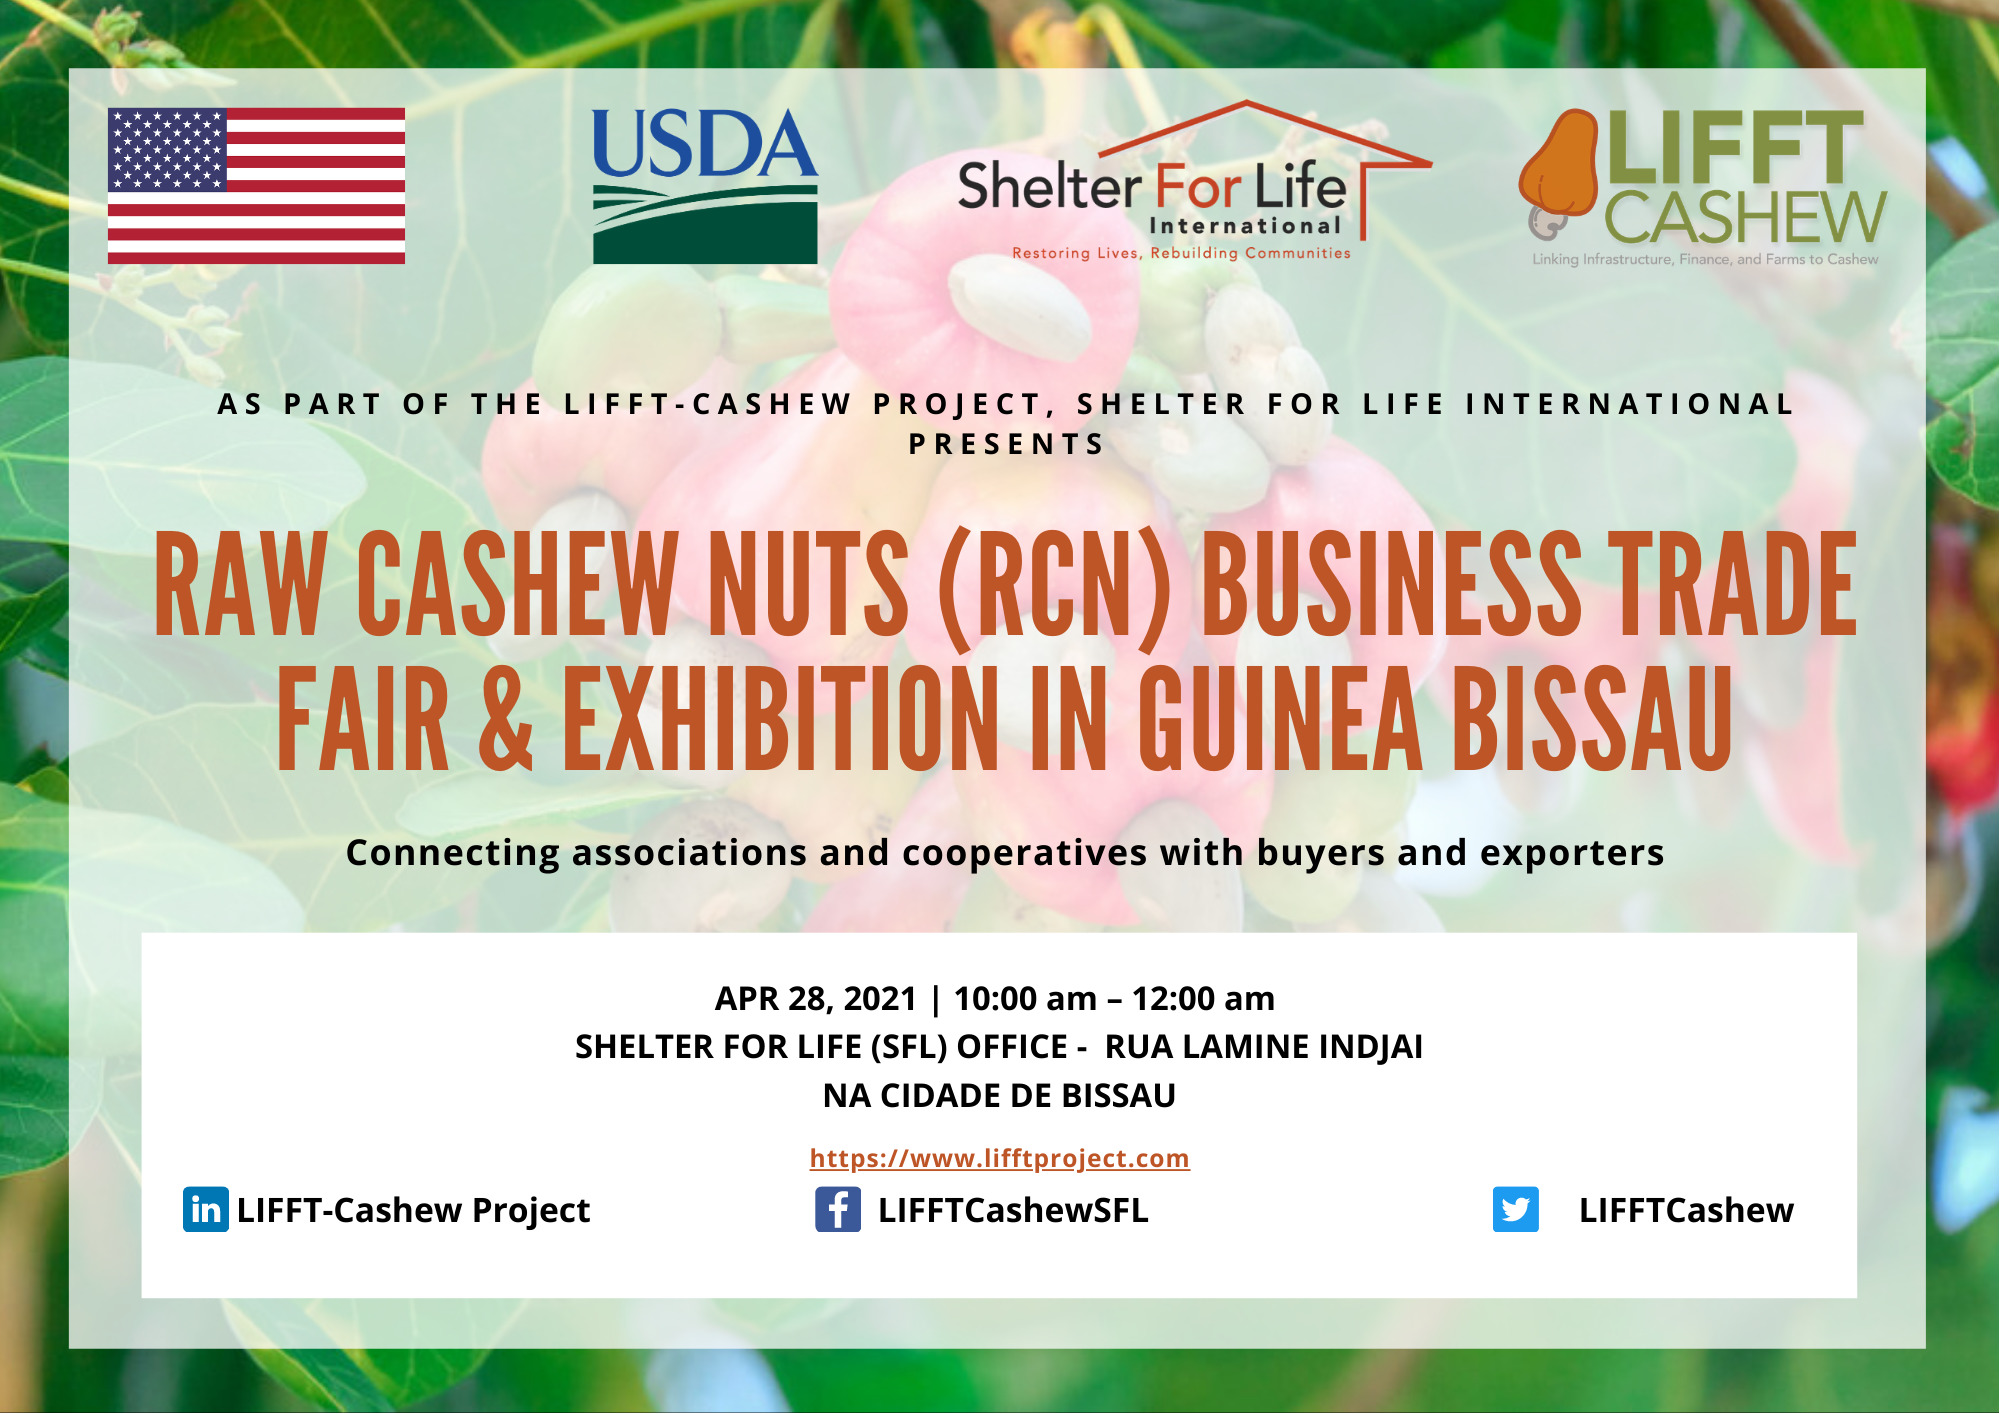 Cashew nuts business trade fair and exhibition in Guinea Bissau